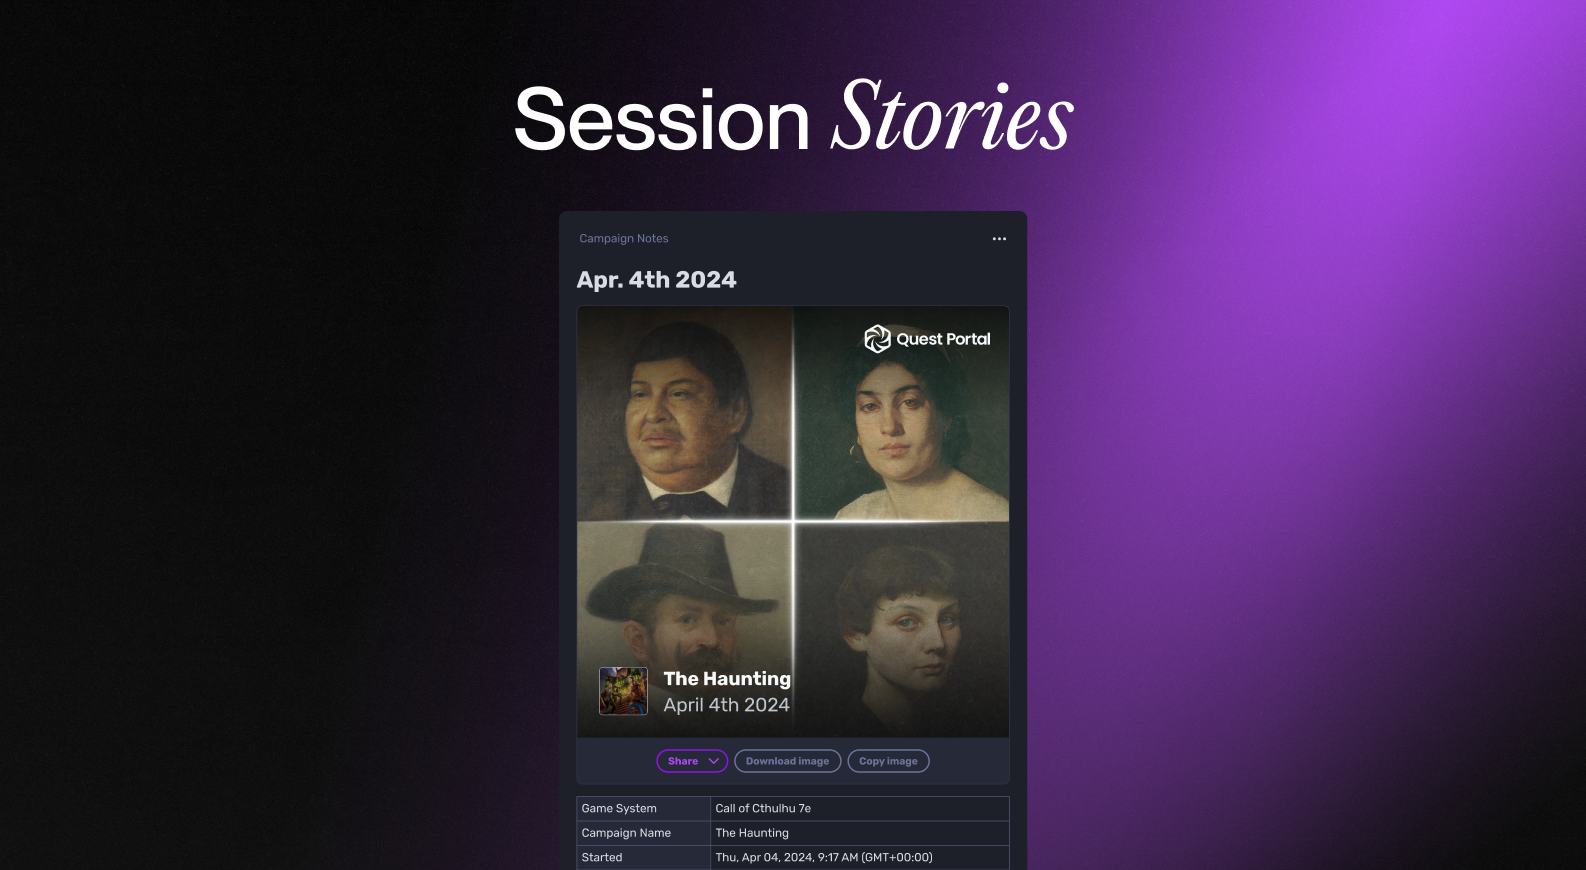 Session Story cover photo showing images of characters.